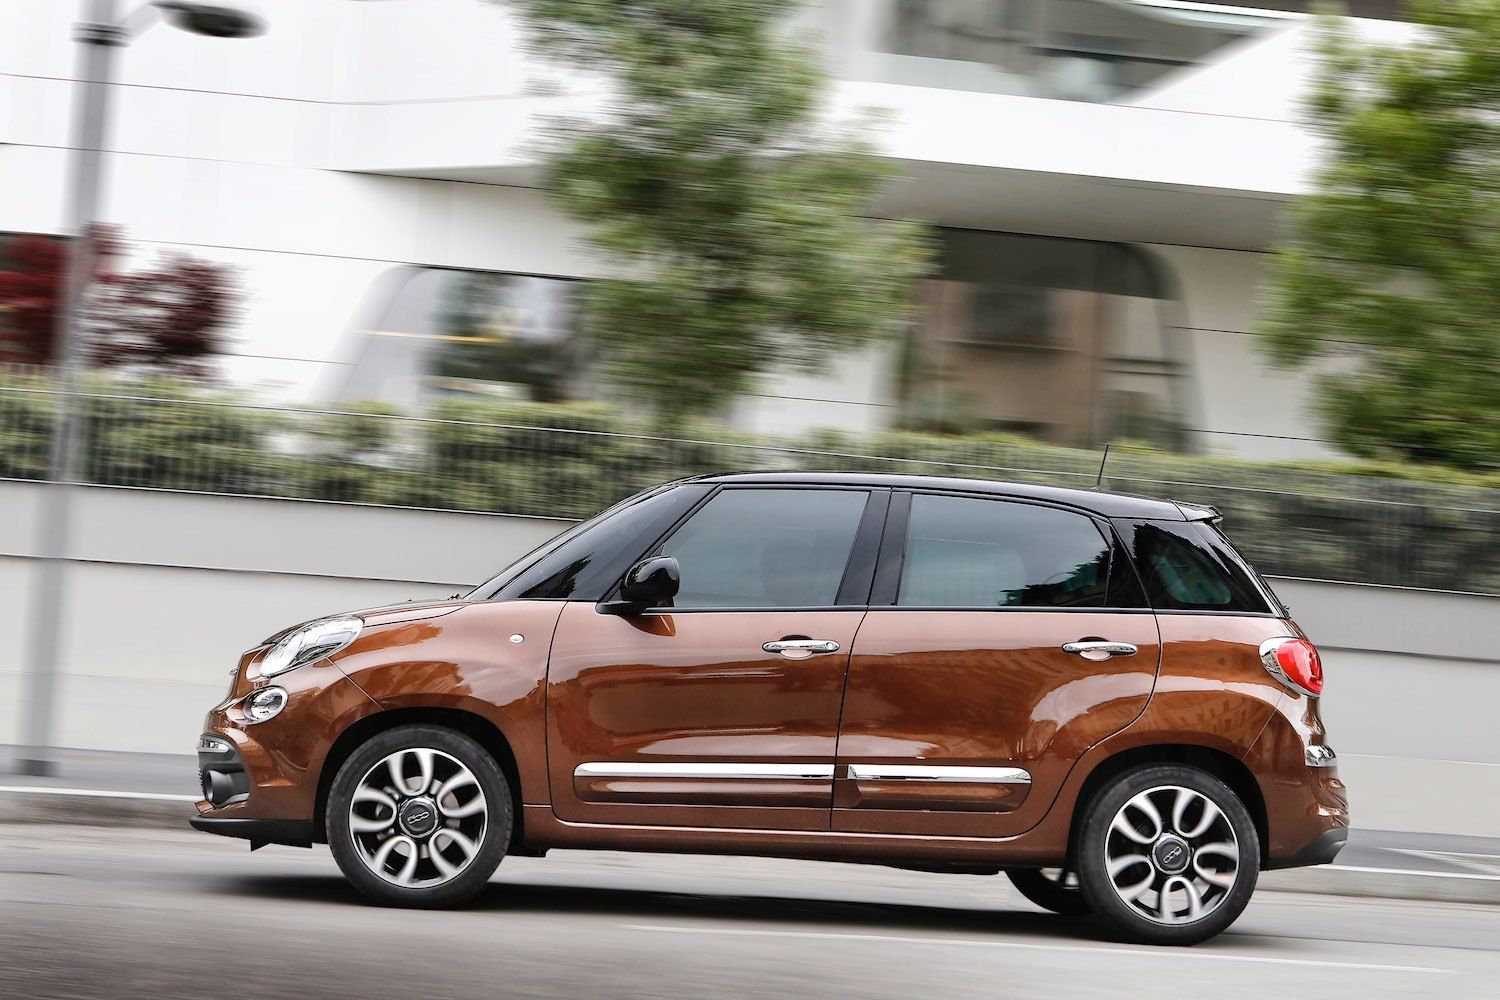 Tim Barnes-Clay reviews the New Fiat 500L from the first drive in Italy 17